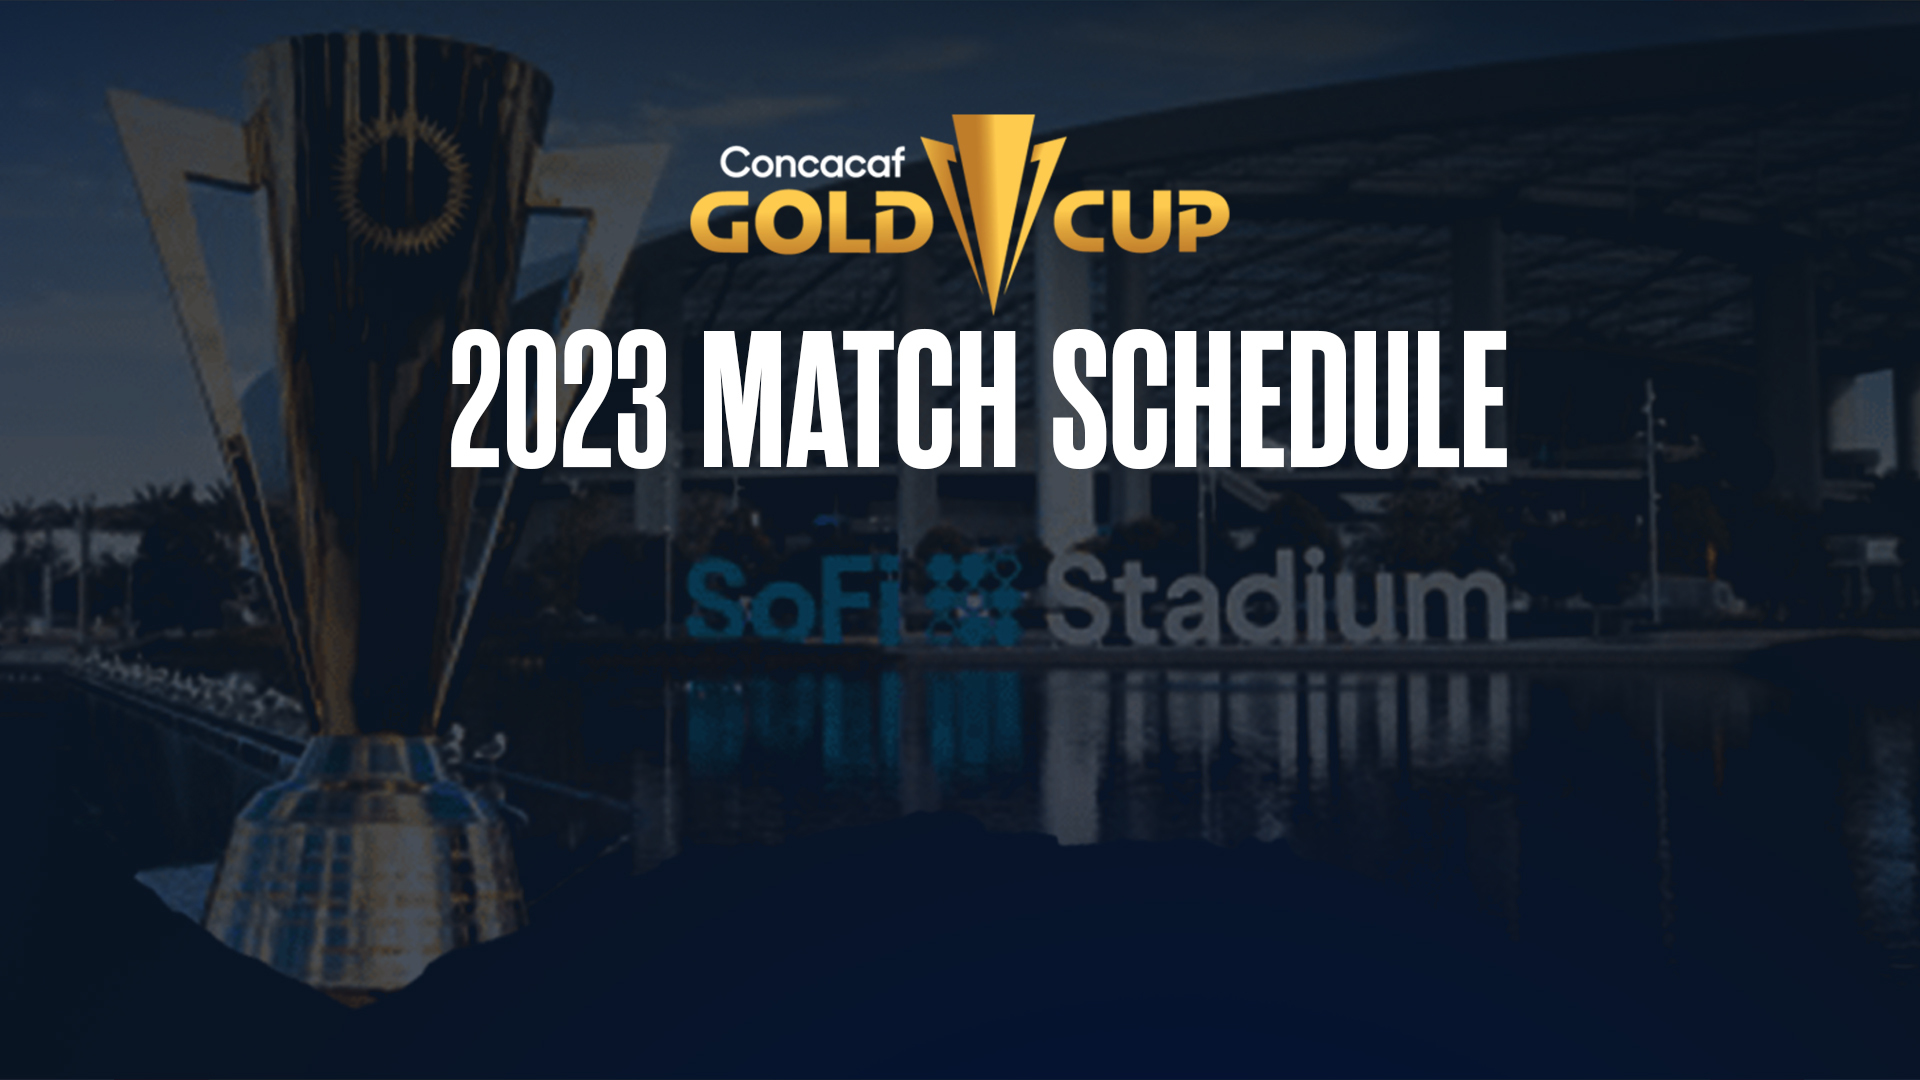 Shell Energy Stadium to host six national teams for the 2023 Gold